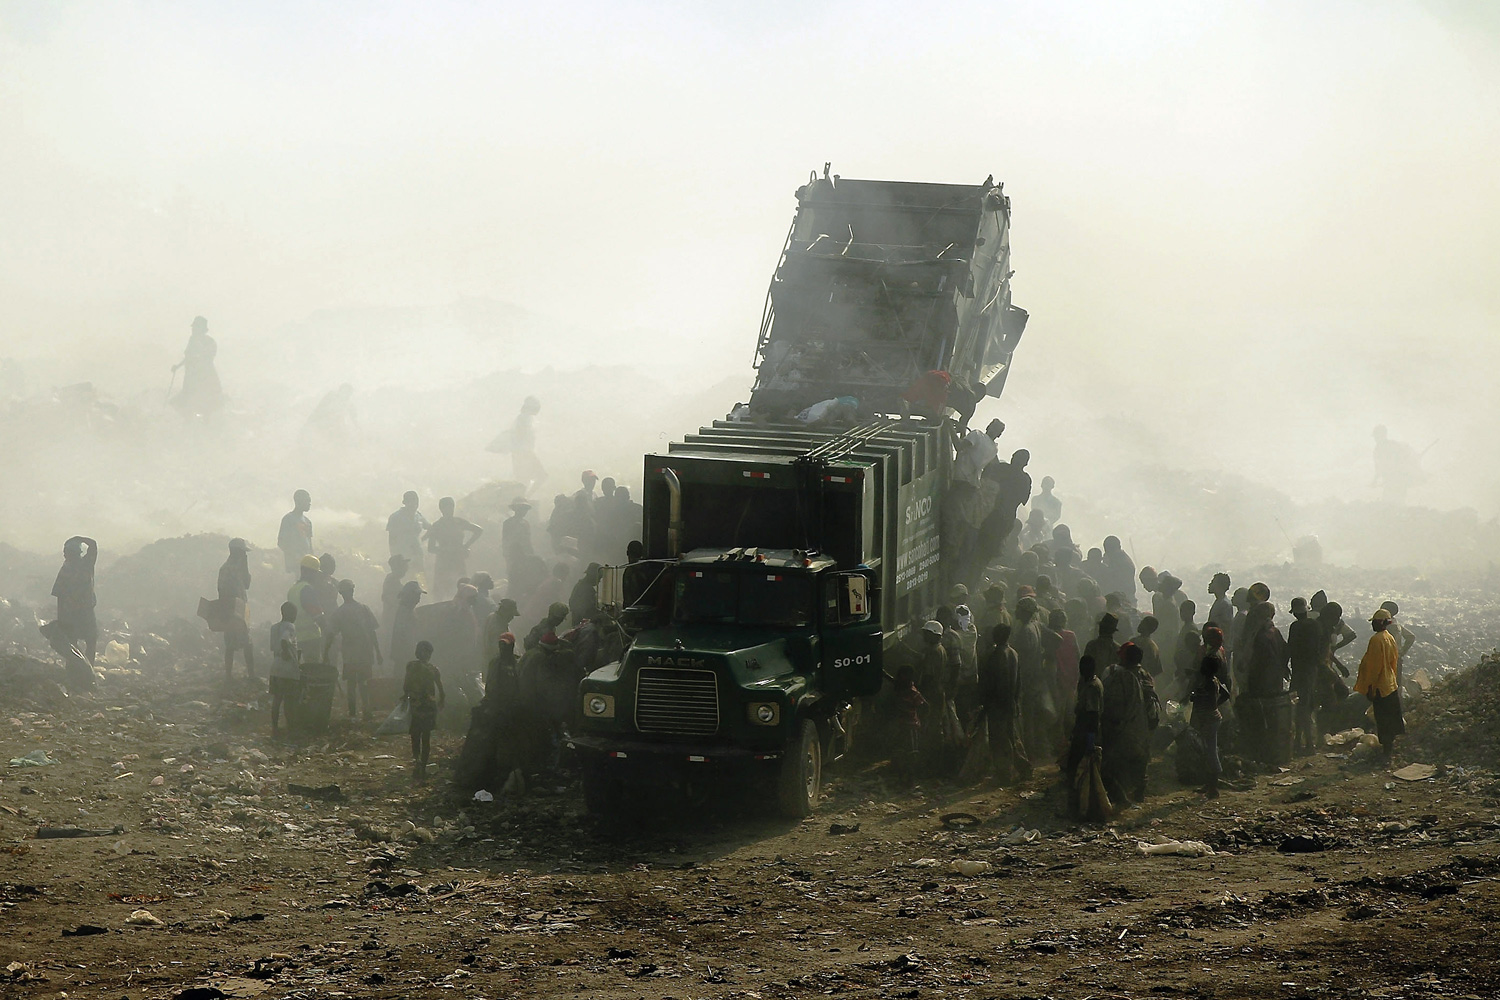 March 7, 2012. Children and adults scavenge for recyclables and other usable items around a garbage truck at the Trutier dump on the outskirts of Port-au-Prince, Haiti.